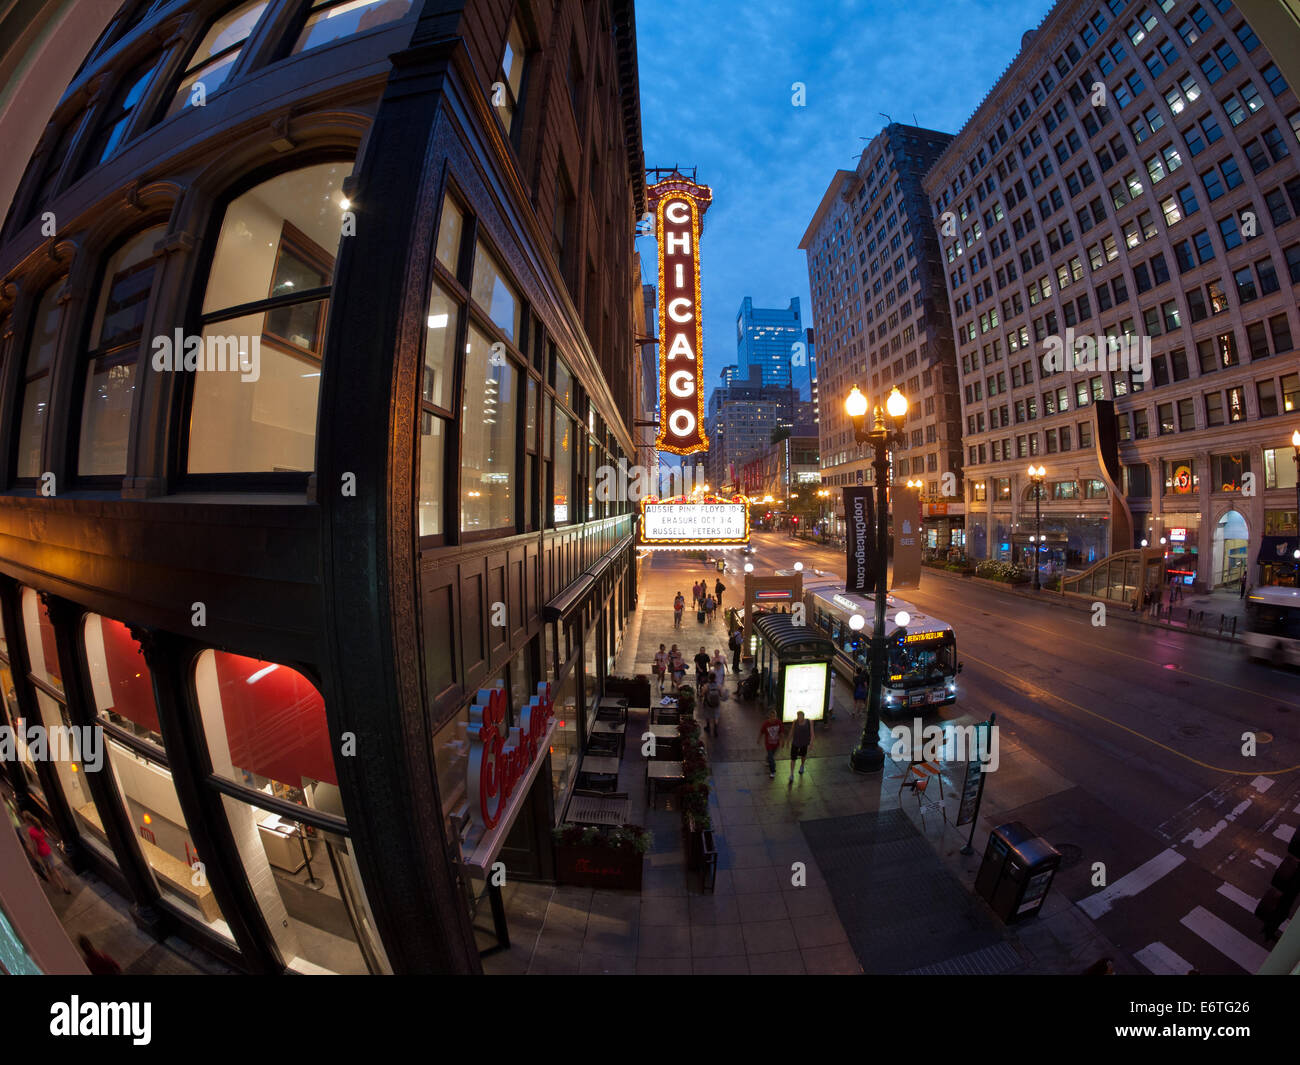 A night, fisheye view of the corner of North State Street, East Lake Street and the Chicago Theatre in Loop District of Chicago. Stock Photo